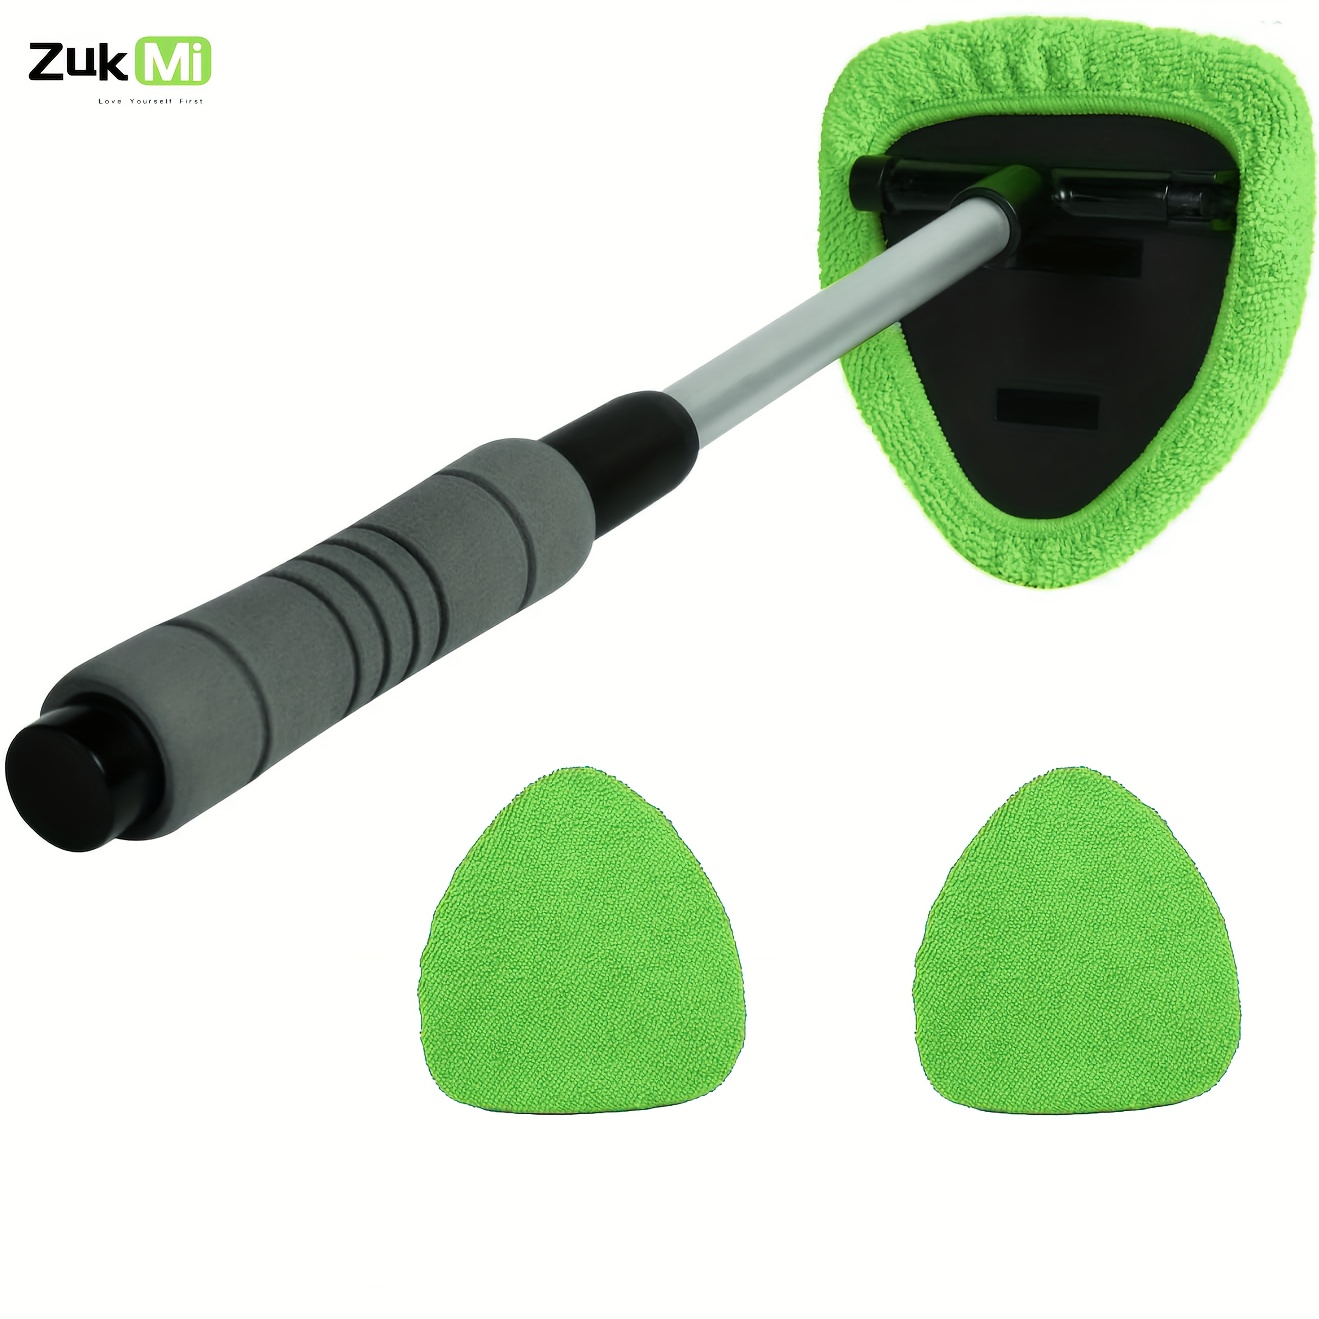 Windshield Cleaning Tool, Car Window Cleaner with Extendable Long